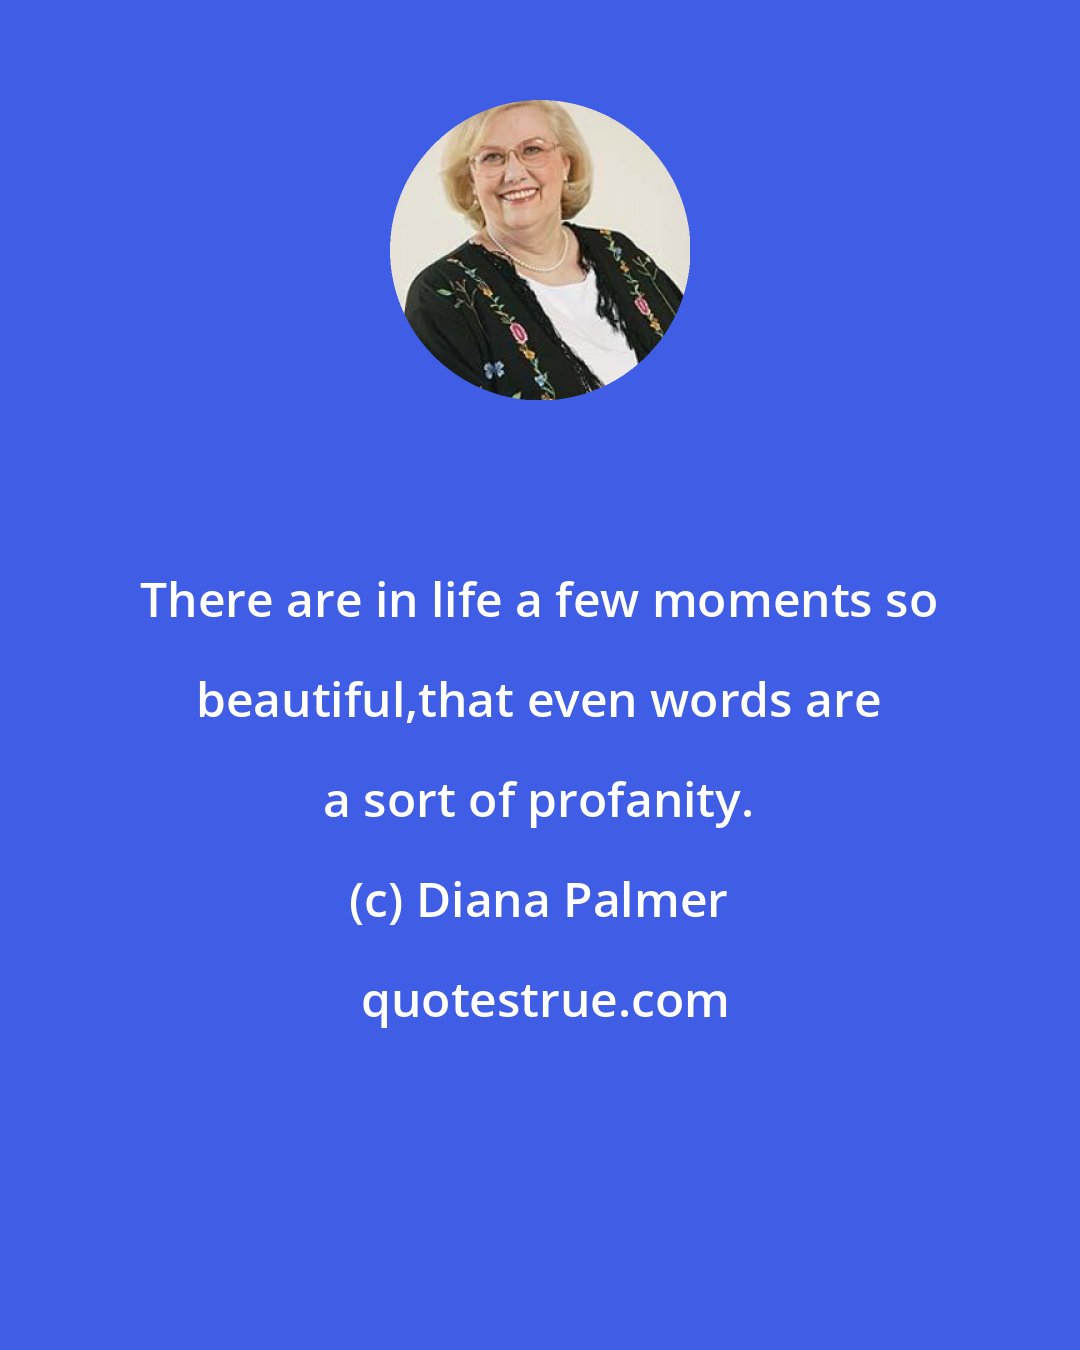 Diana Palmer: There are in life a few moments so beautiful,that even words are a sort of profanity.